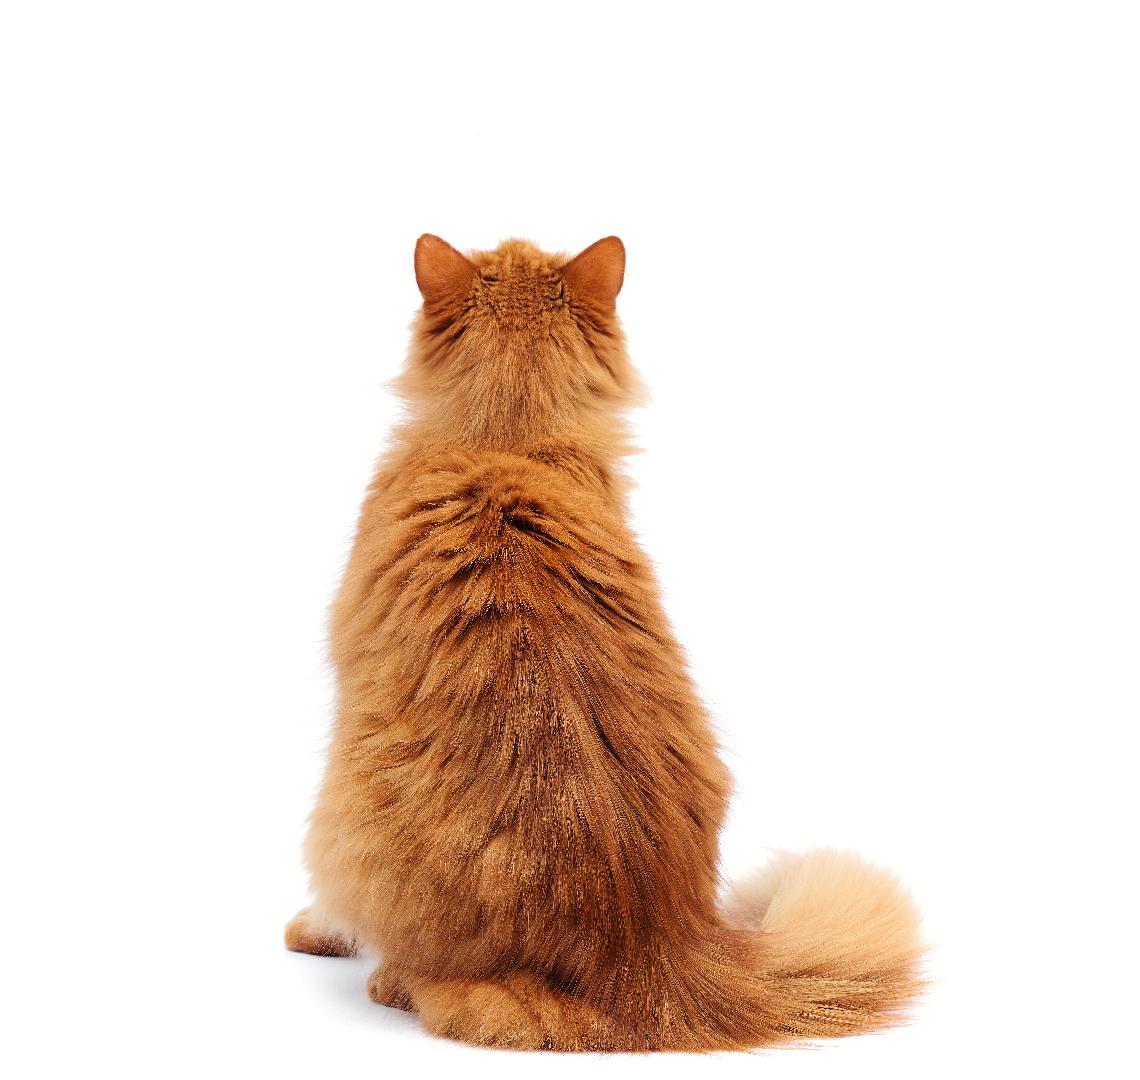 Feline Hyperthyroidism: What is the influence of the food?